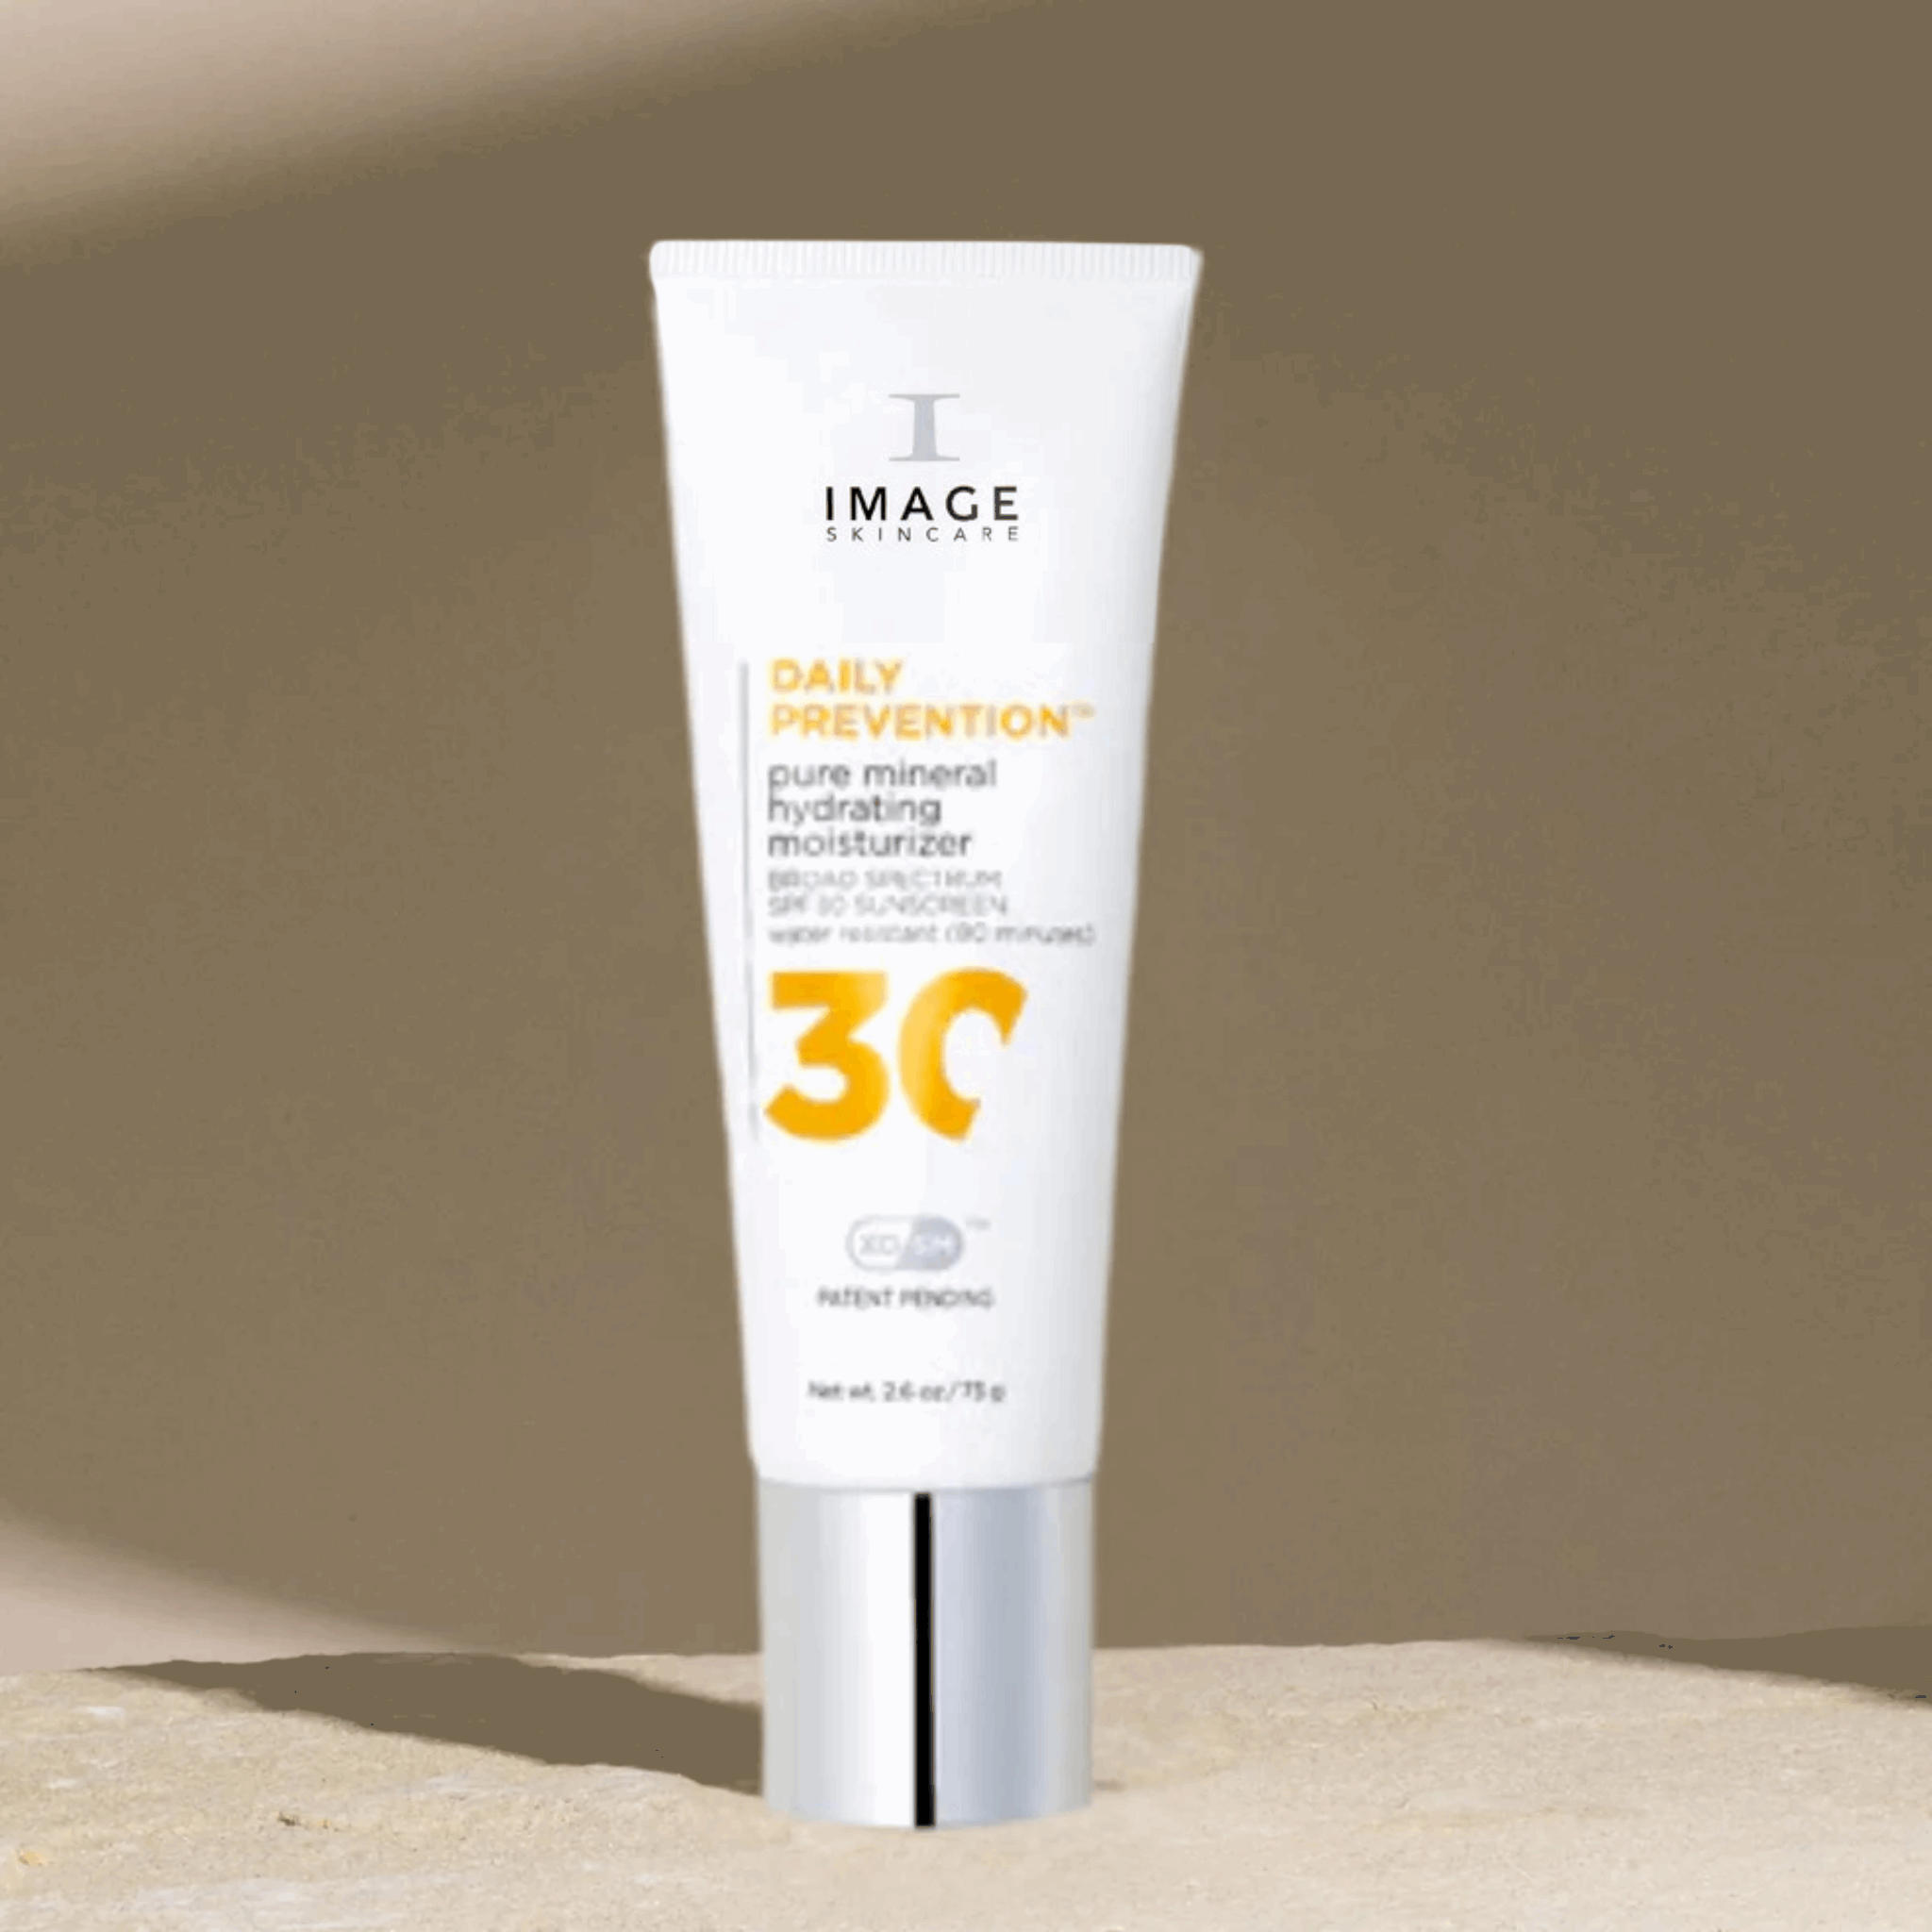 DAILY PREVENTION Pure Mineral Hydrating Moisturizer SPF 30 Image Skincare